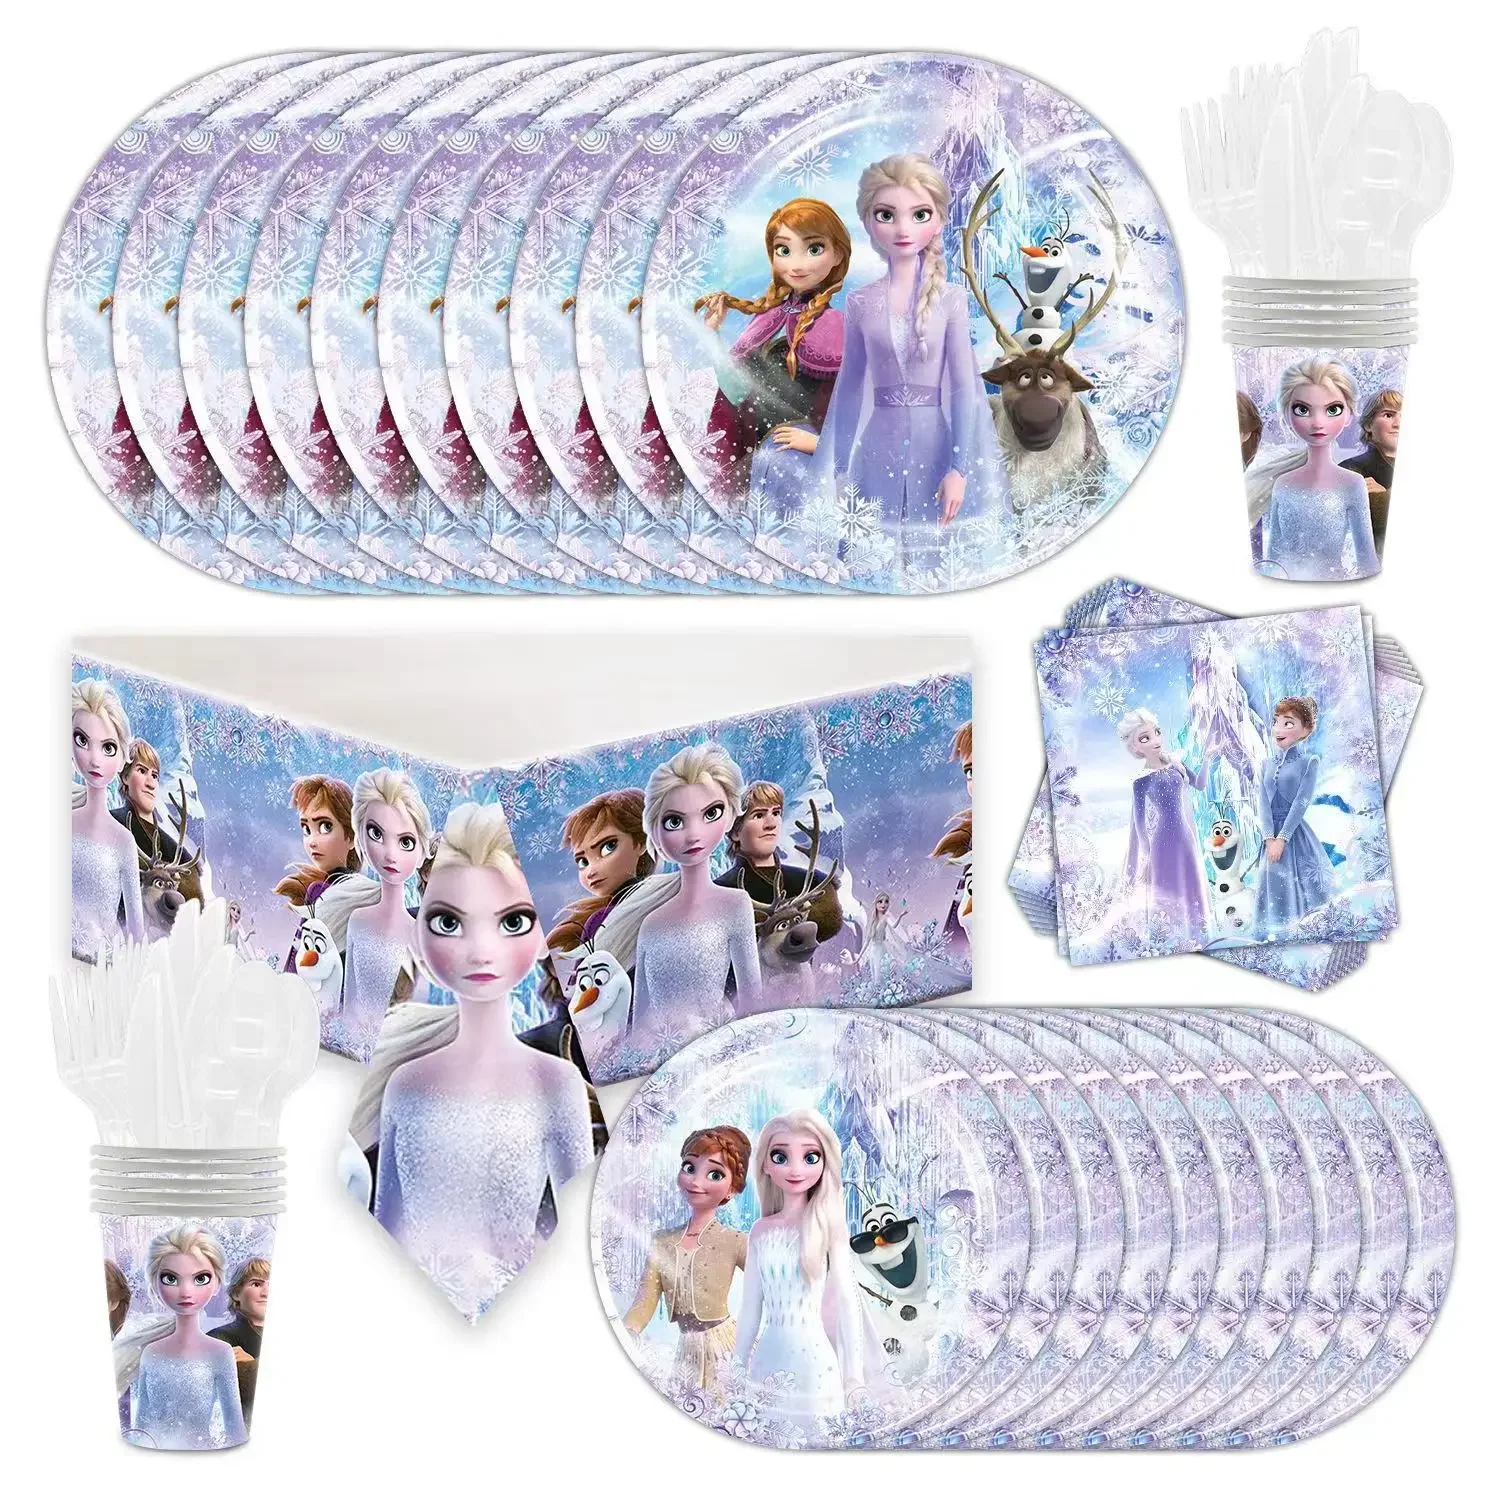 Disney Frozen Elsa Anna Princess Girl Favor Birthday Party Decor Disposable Tableware Cup Plate Straw Banner Balloon Supplies summer tropical disposable tableware flower palm leaves flamingo paper plate cup hawaiian luau party supplies wedding decor